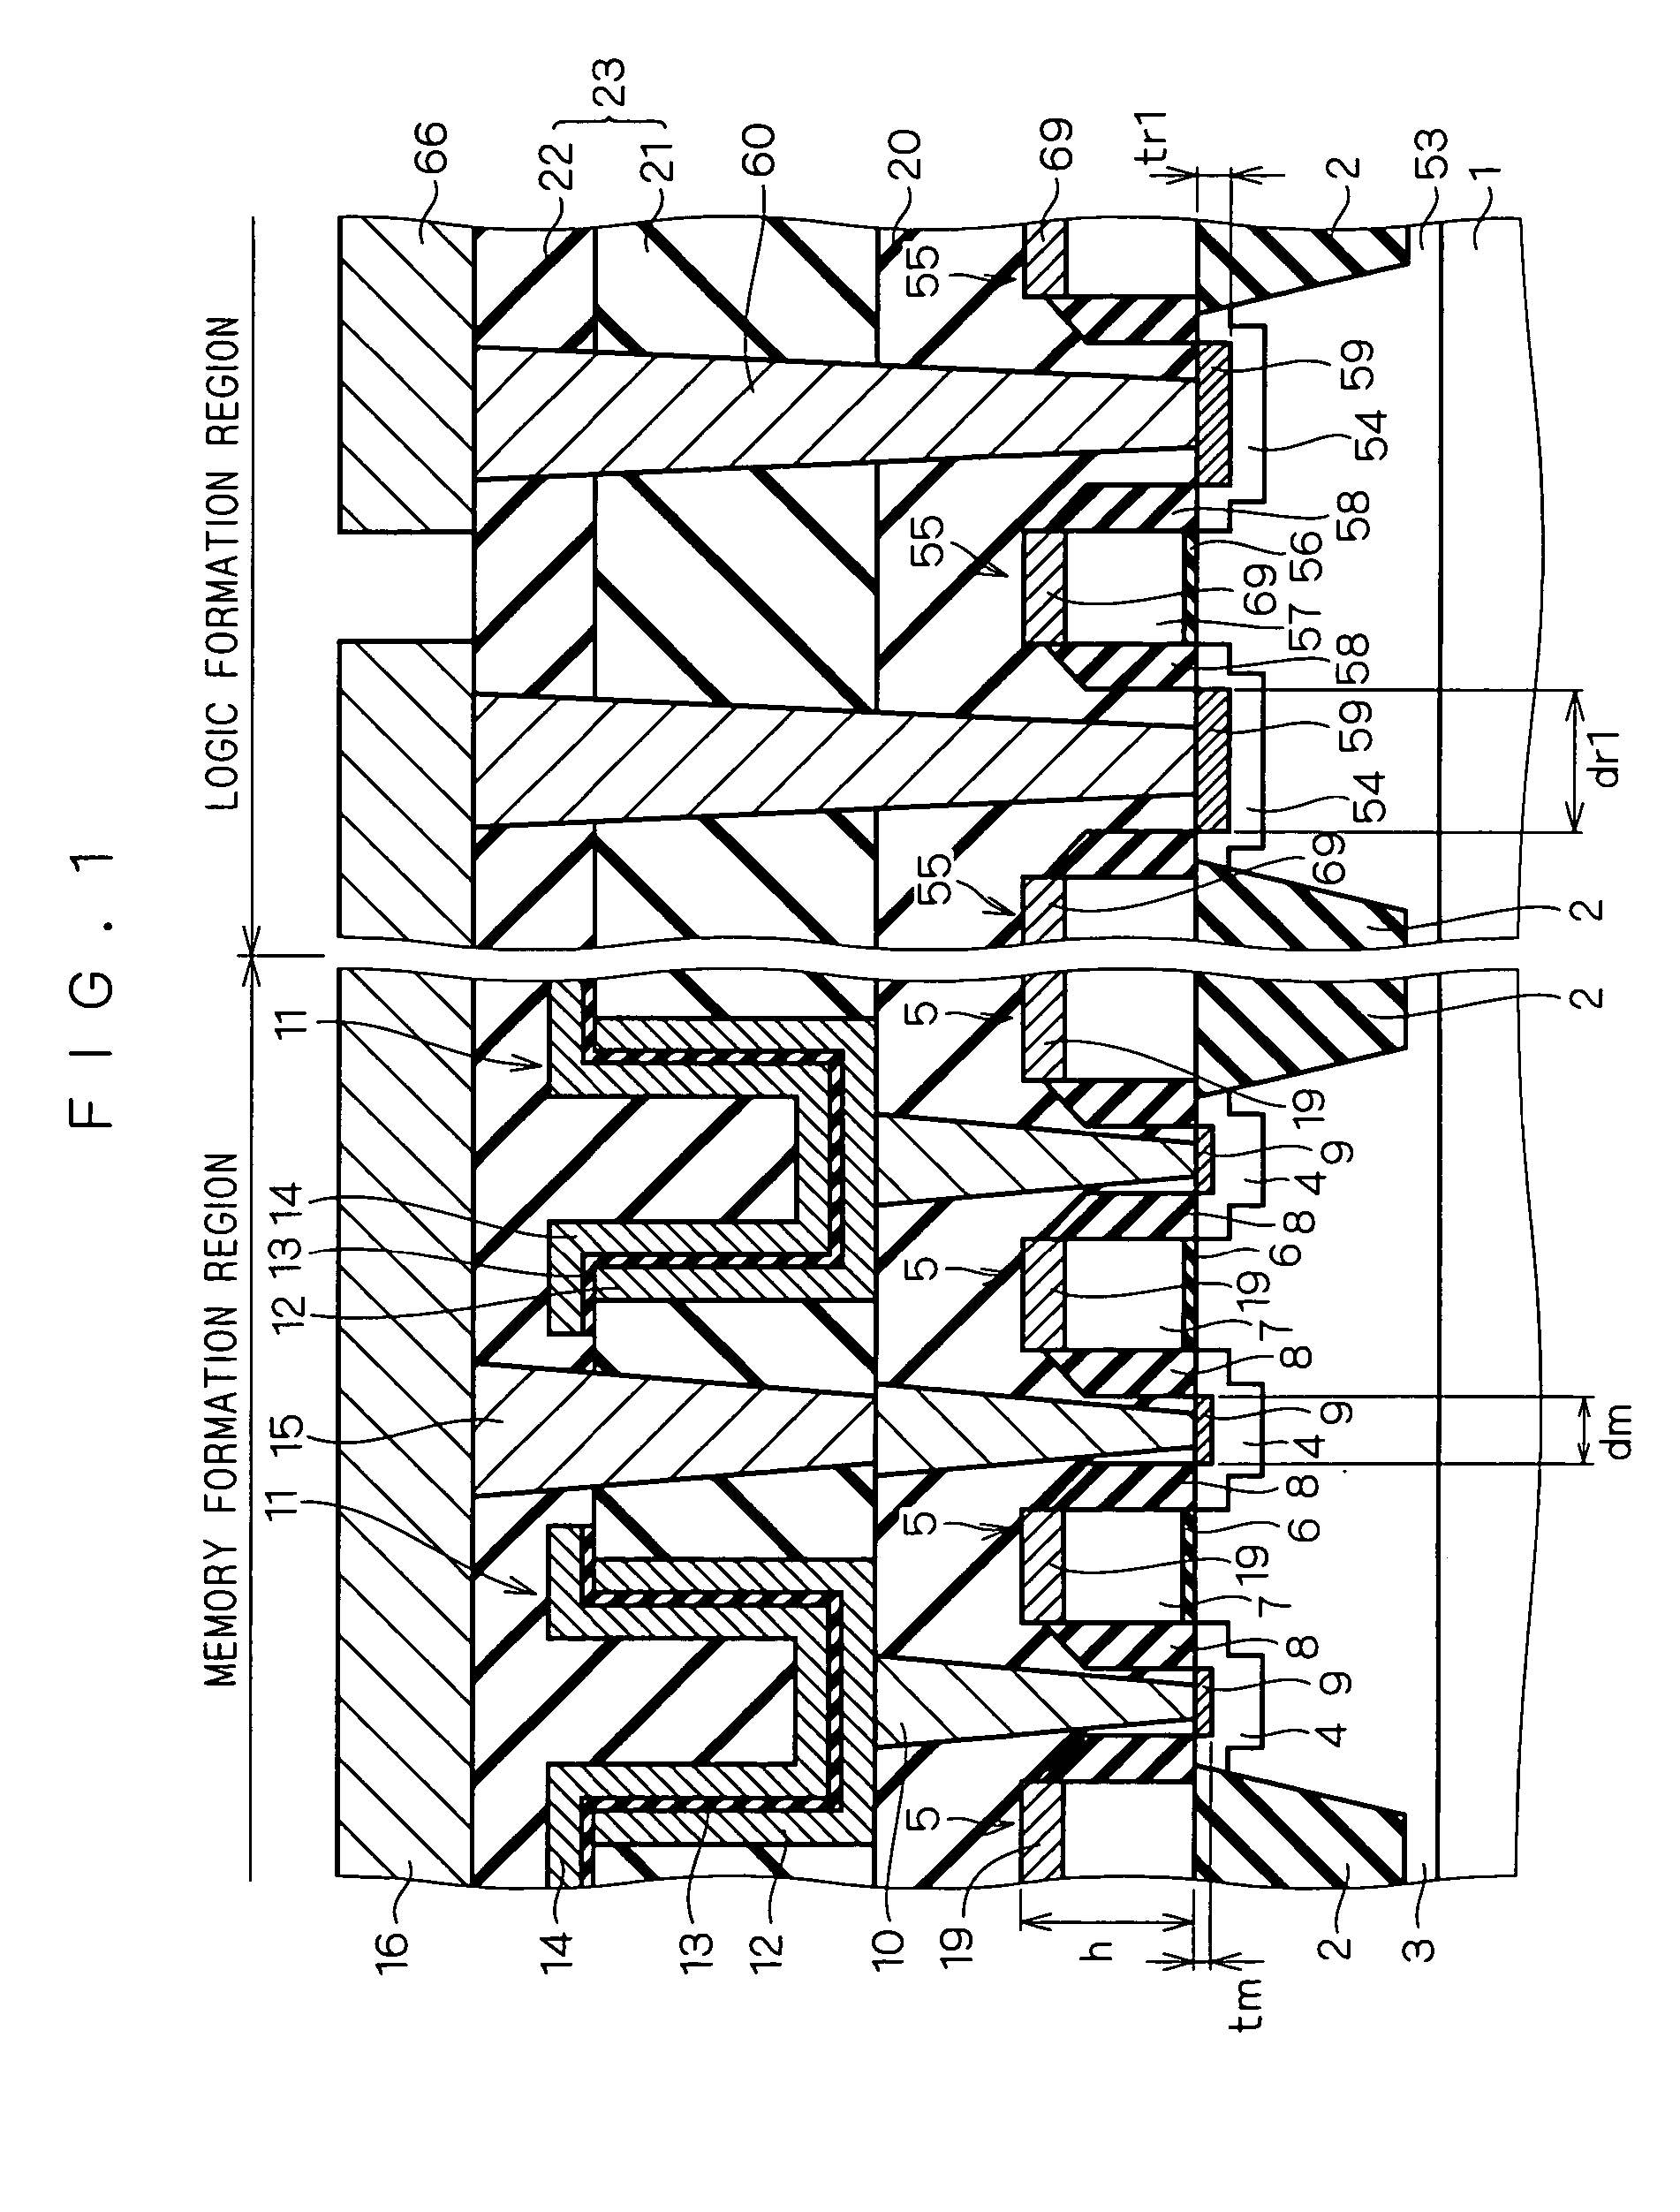 Semiconductor device having memory and logic devices with reduced resistance and leakage current